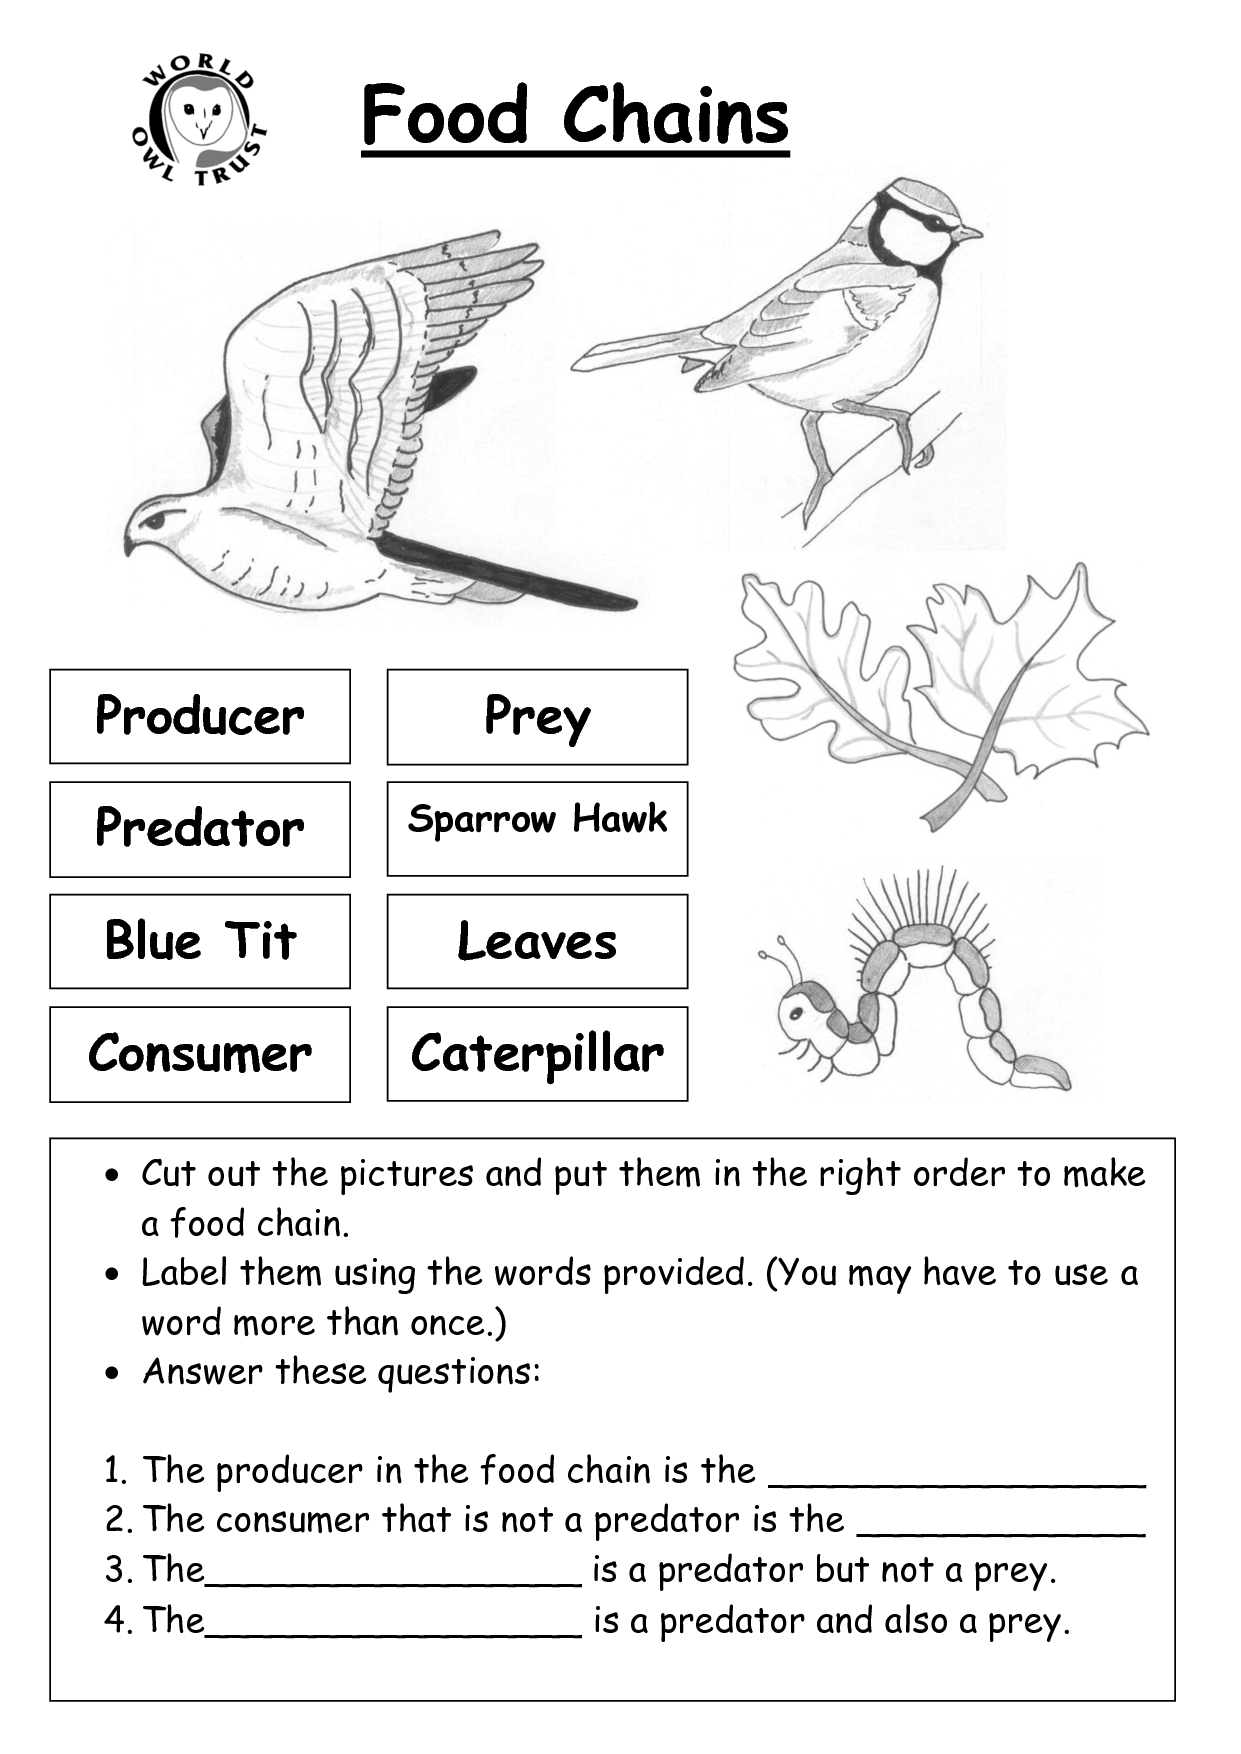 8 Best Images of Ecosystem Food Chain Worksheet High School